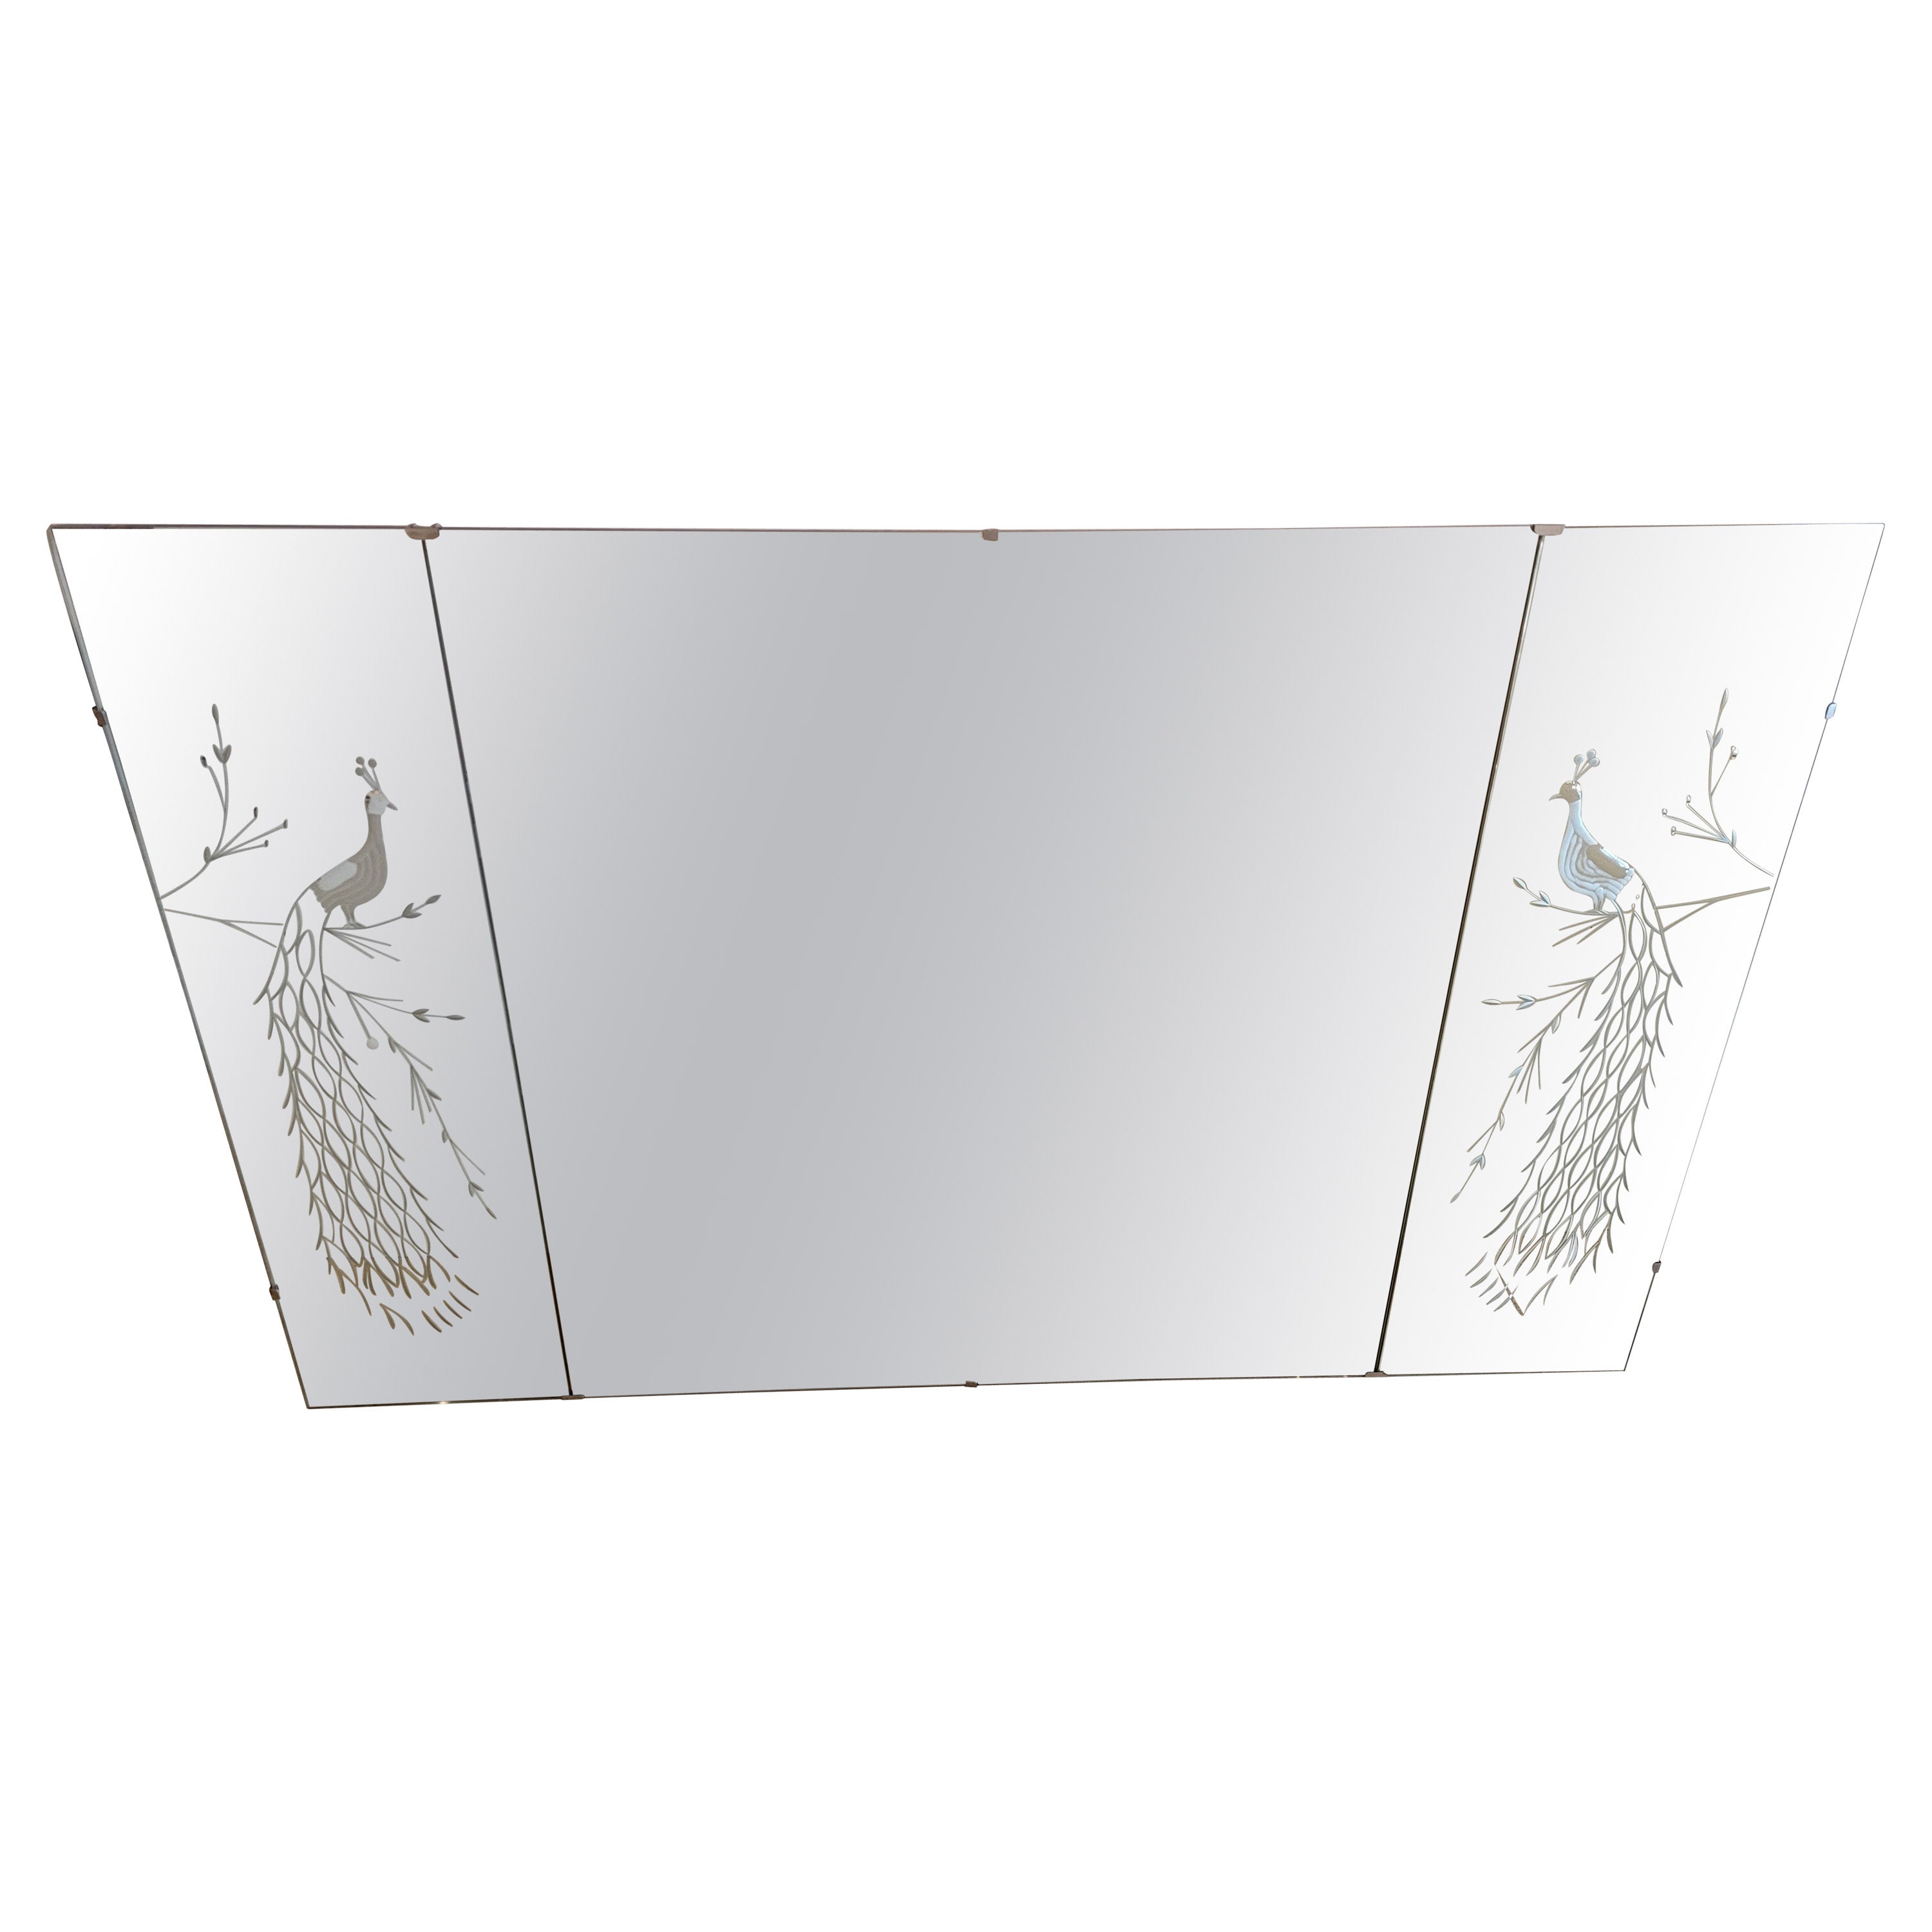 Monumental & Lovely Vintage 3 Panel Horizontal Mirror with Etched Peacocks For Sale